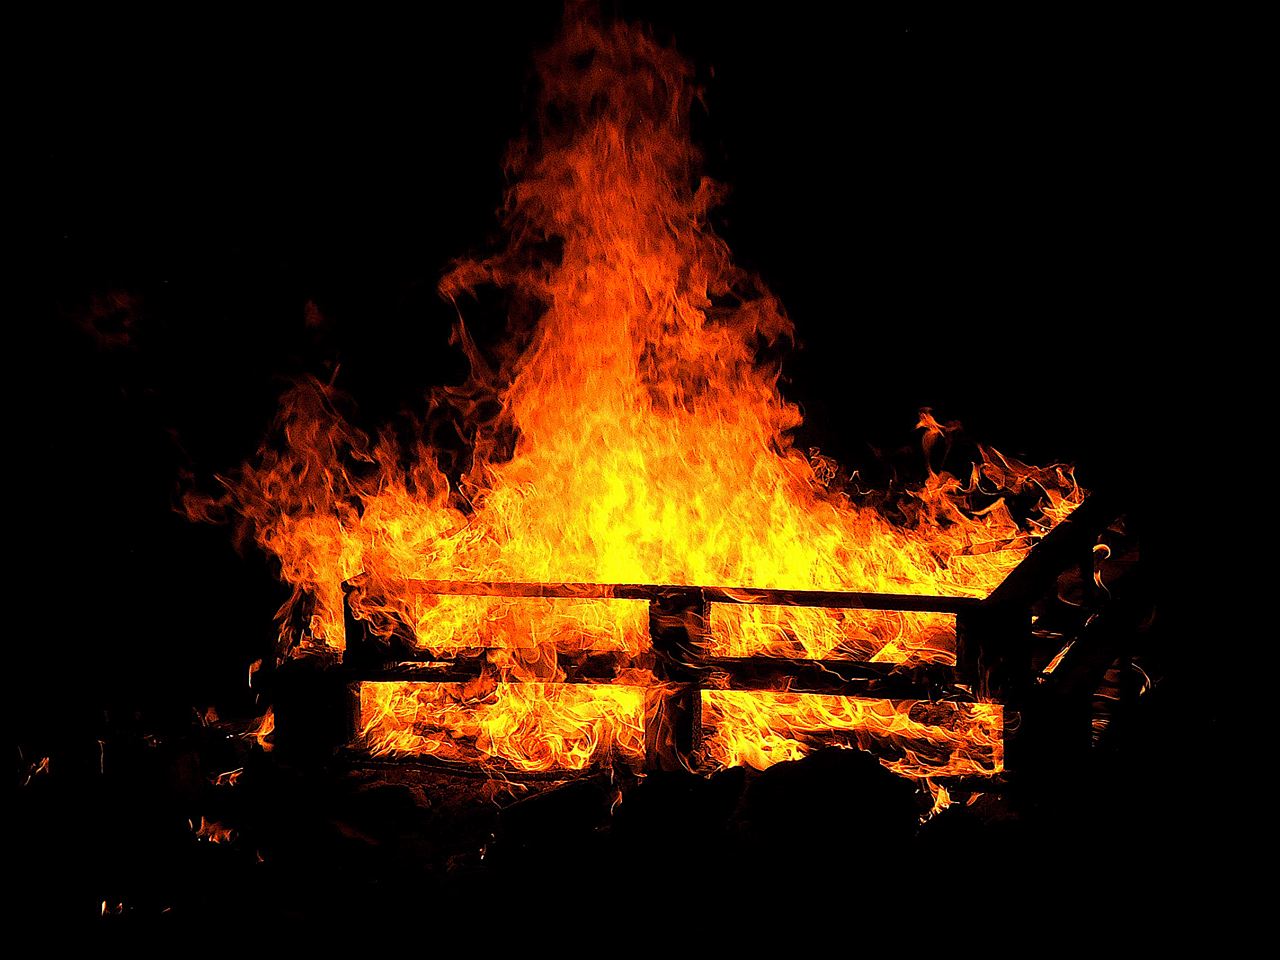 File:Campfires burning wood pits.jpg - Wikimedia Commons